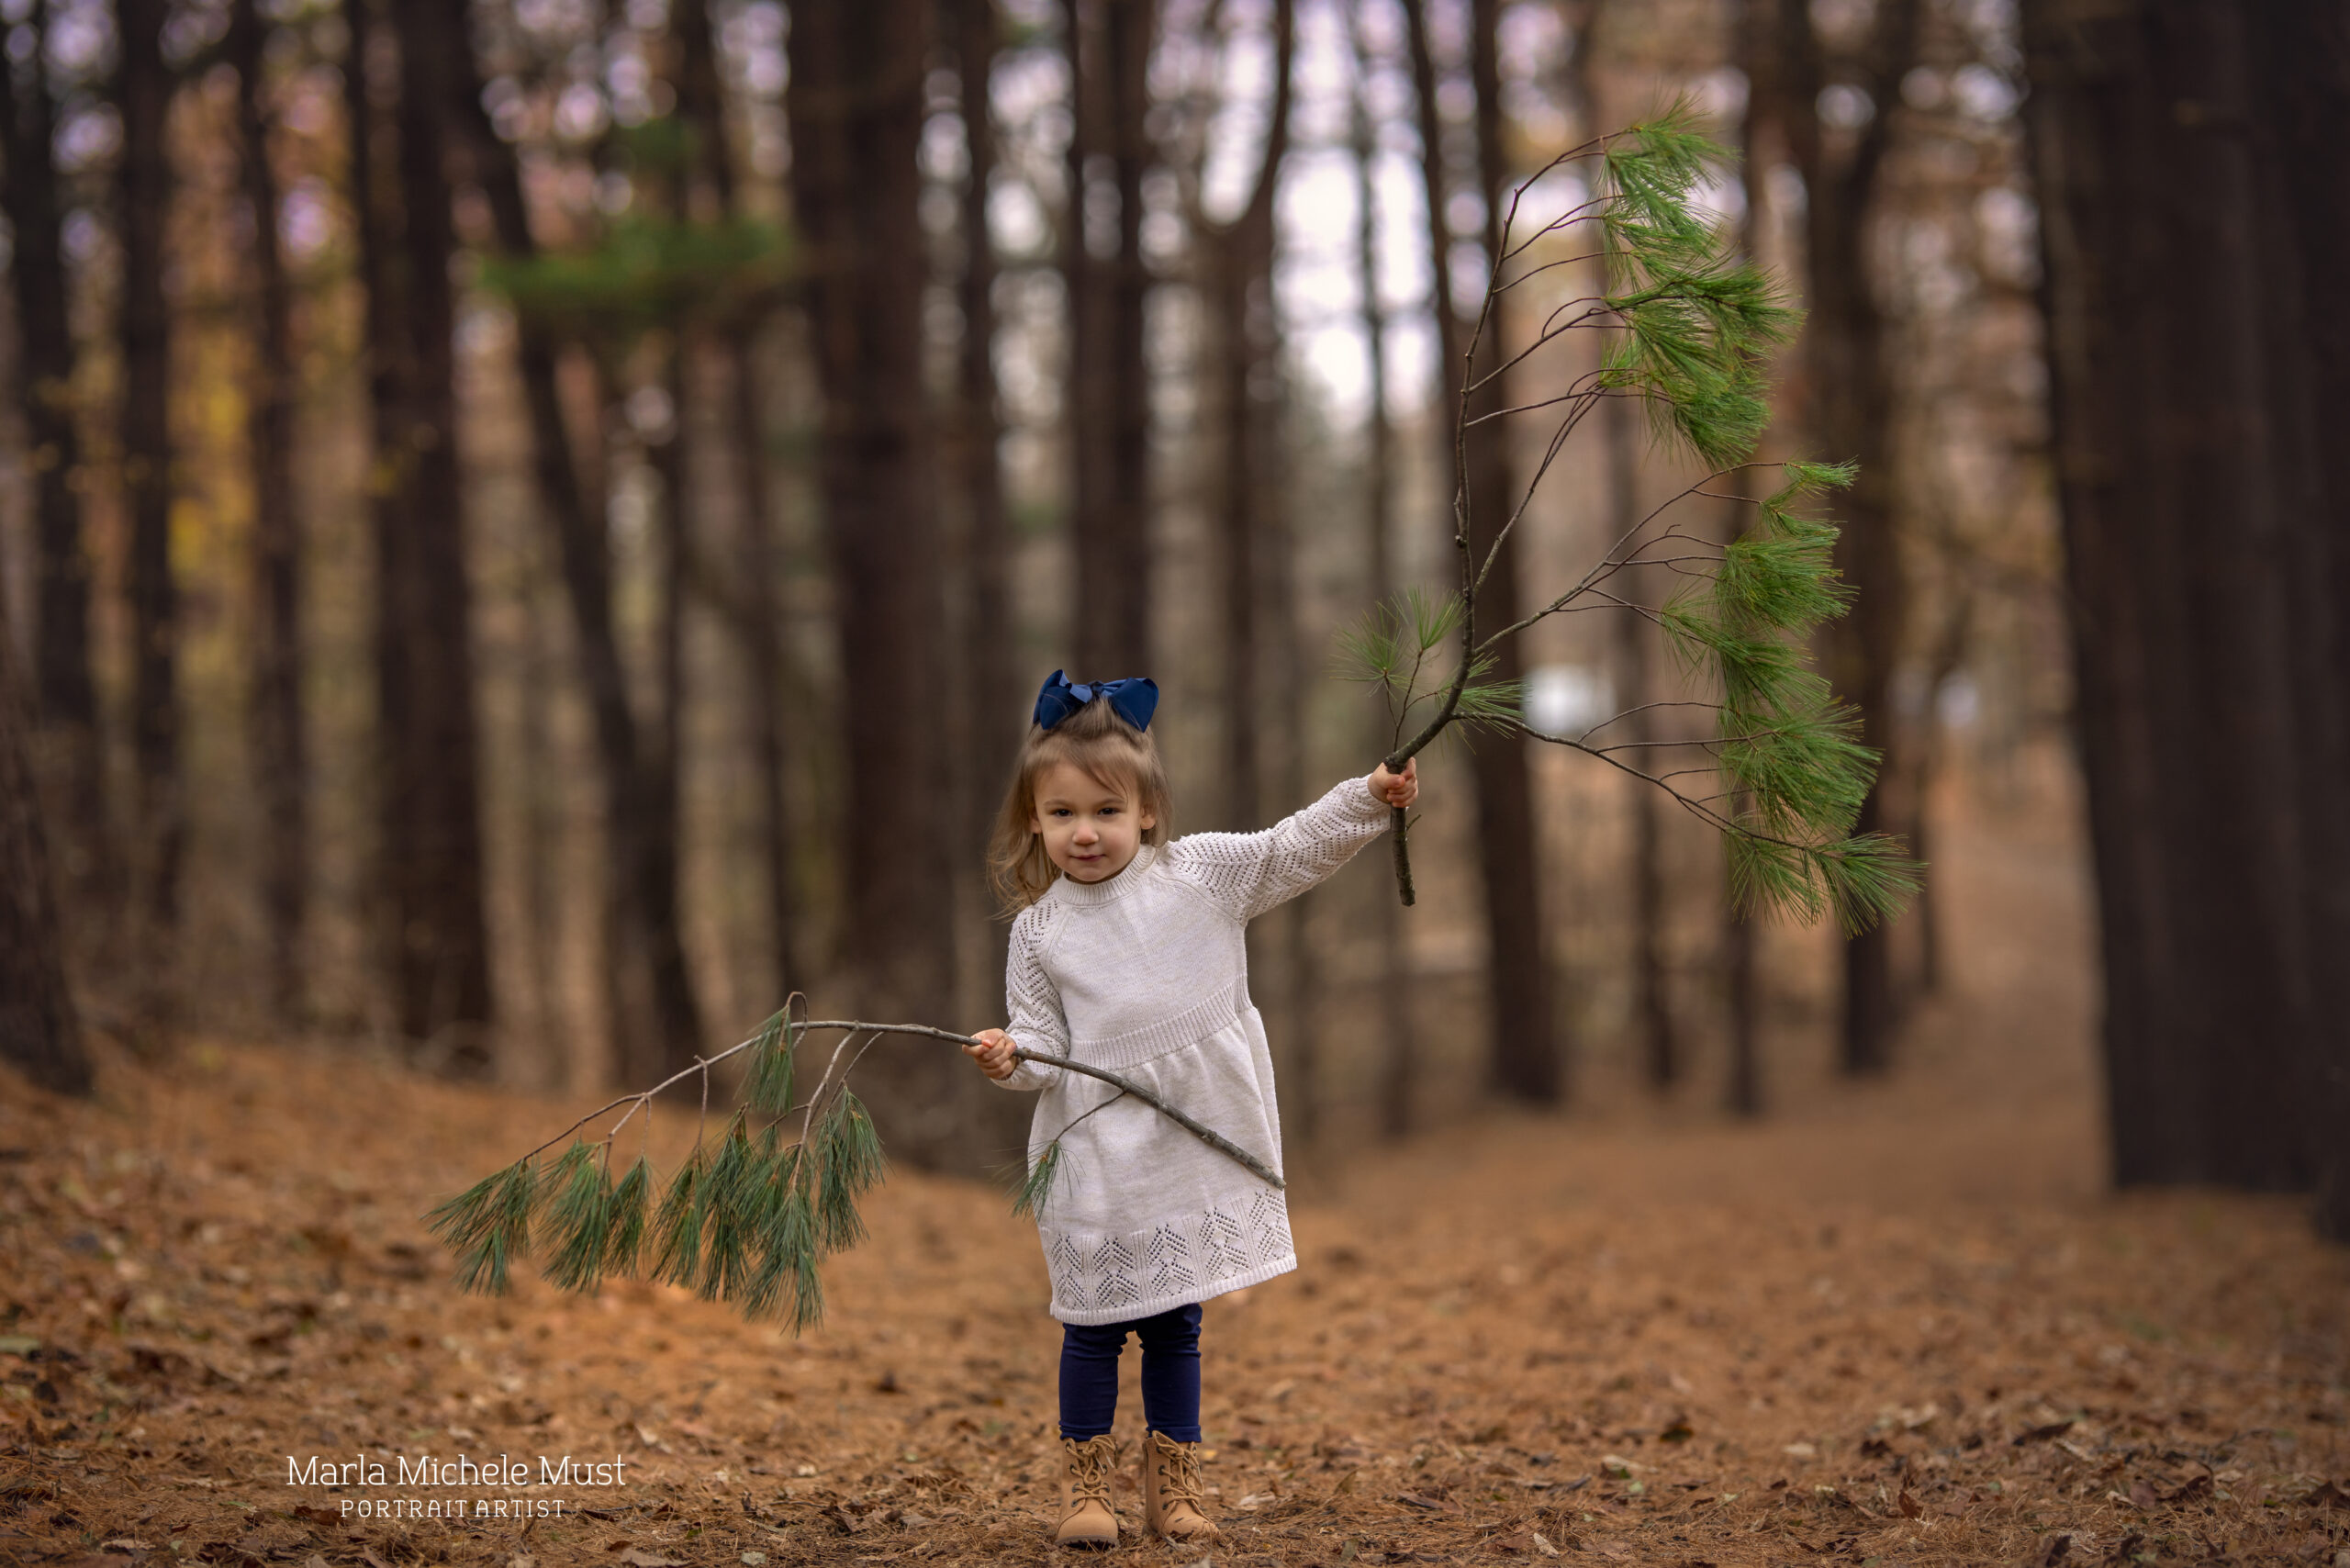 A young child walking through a bed of leaves in the forest while holding a branch somewhere near Detroit.